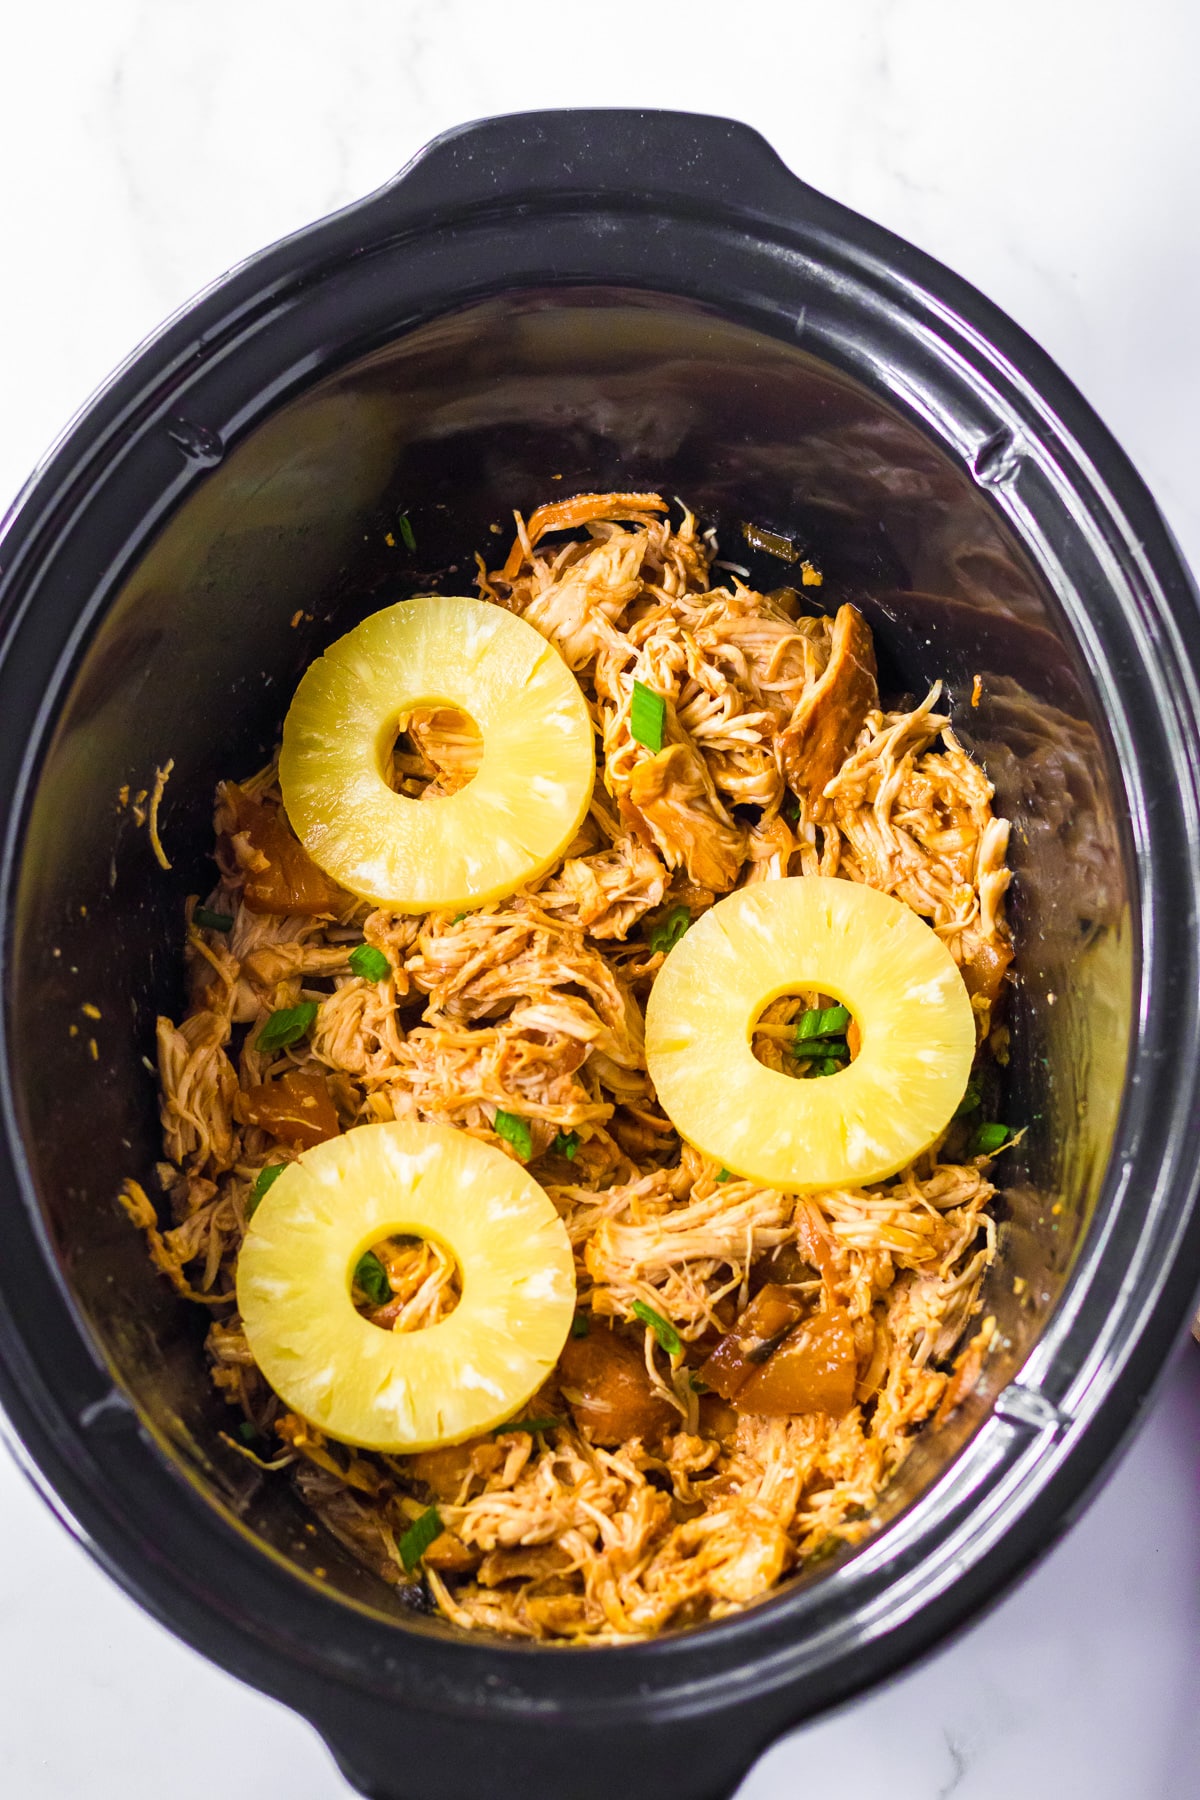 Shredded chicken in the slow cooker base with three rings of pineapple slices on top.